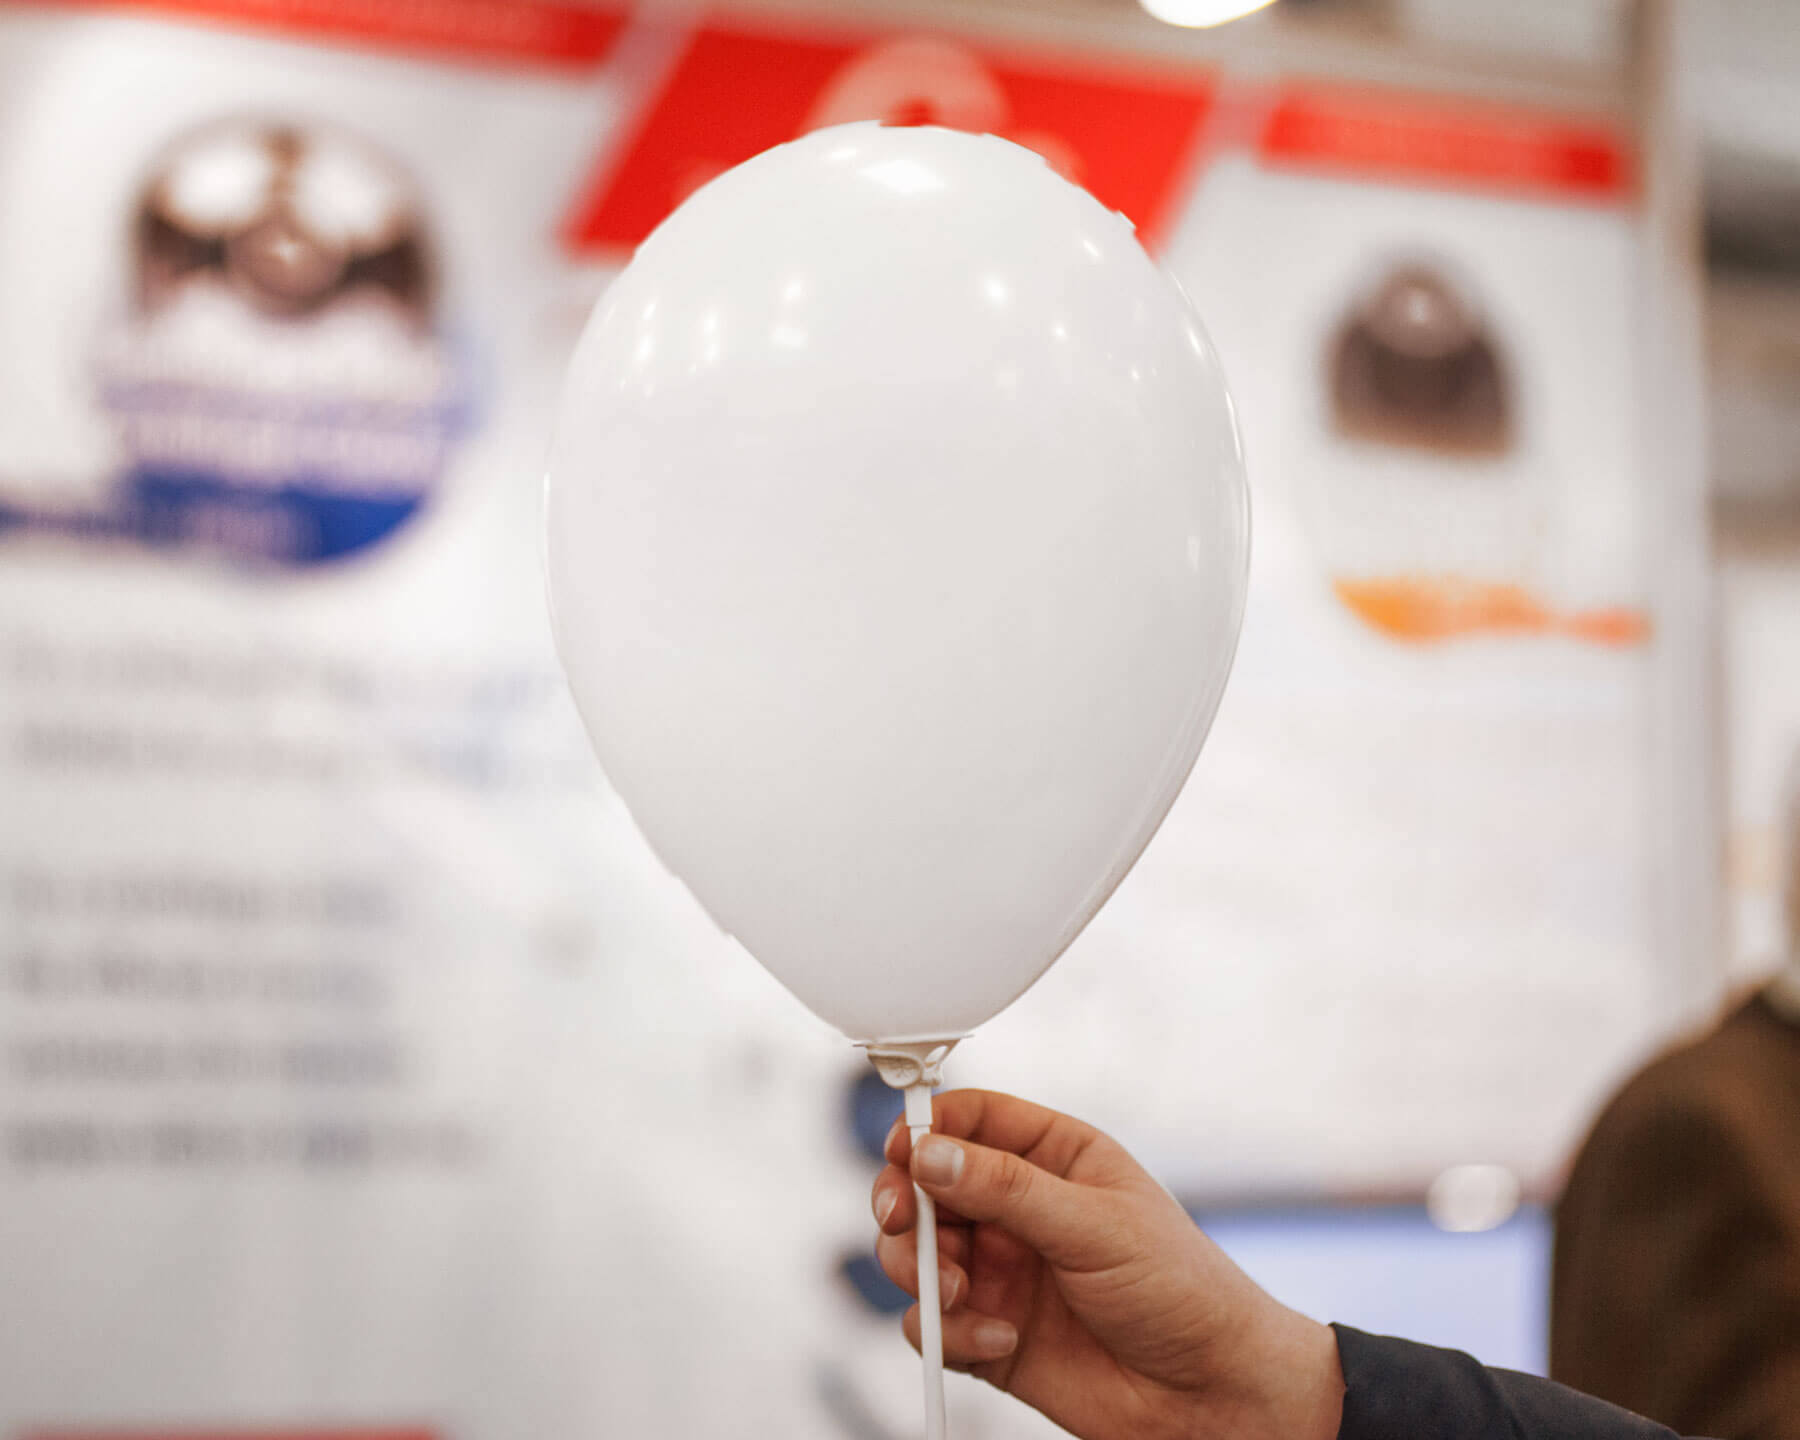 Mockup Showcasing Hand Holding Balloon with Blurry Background